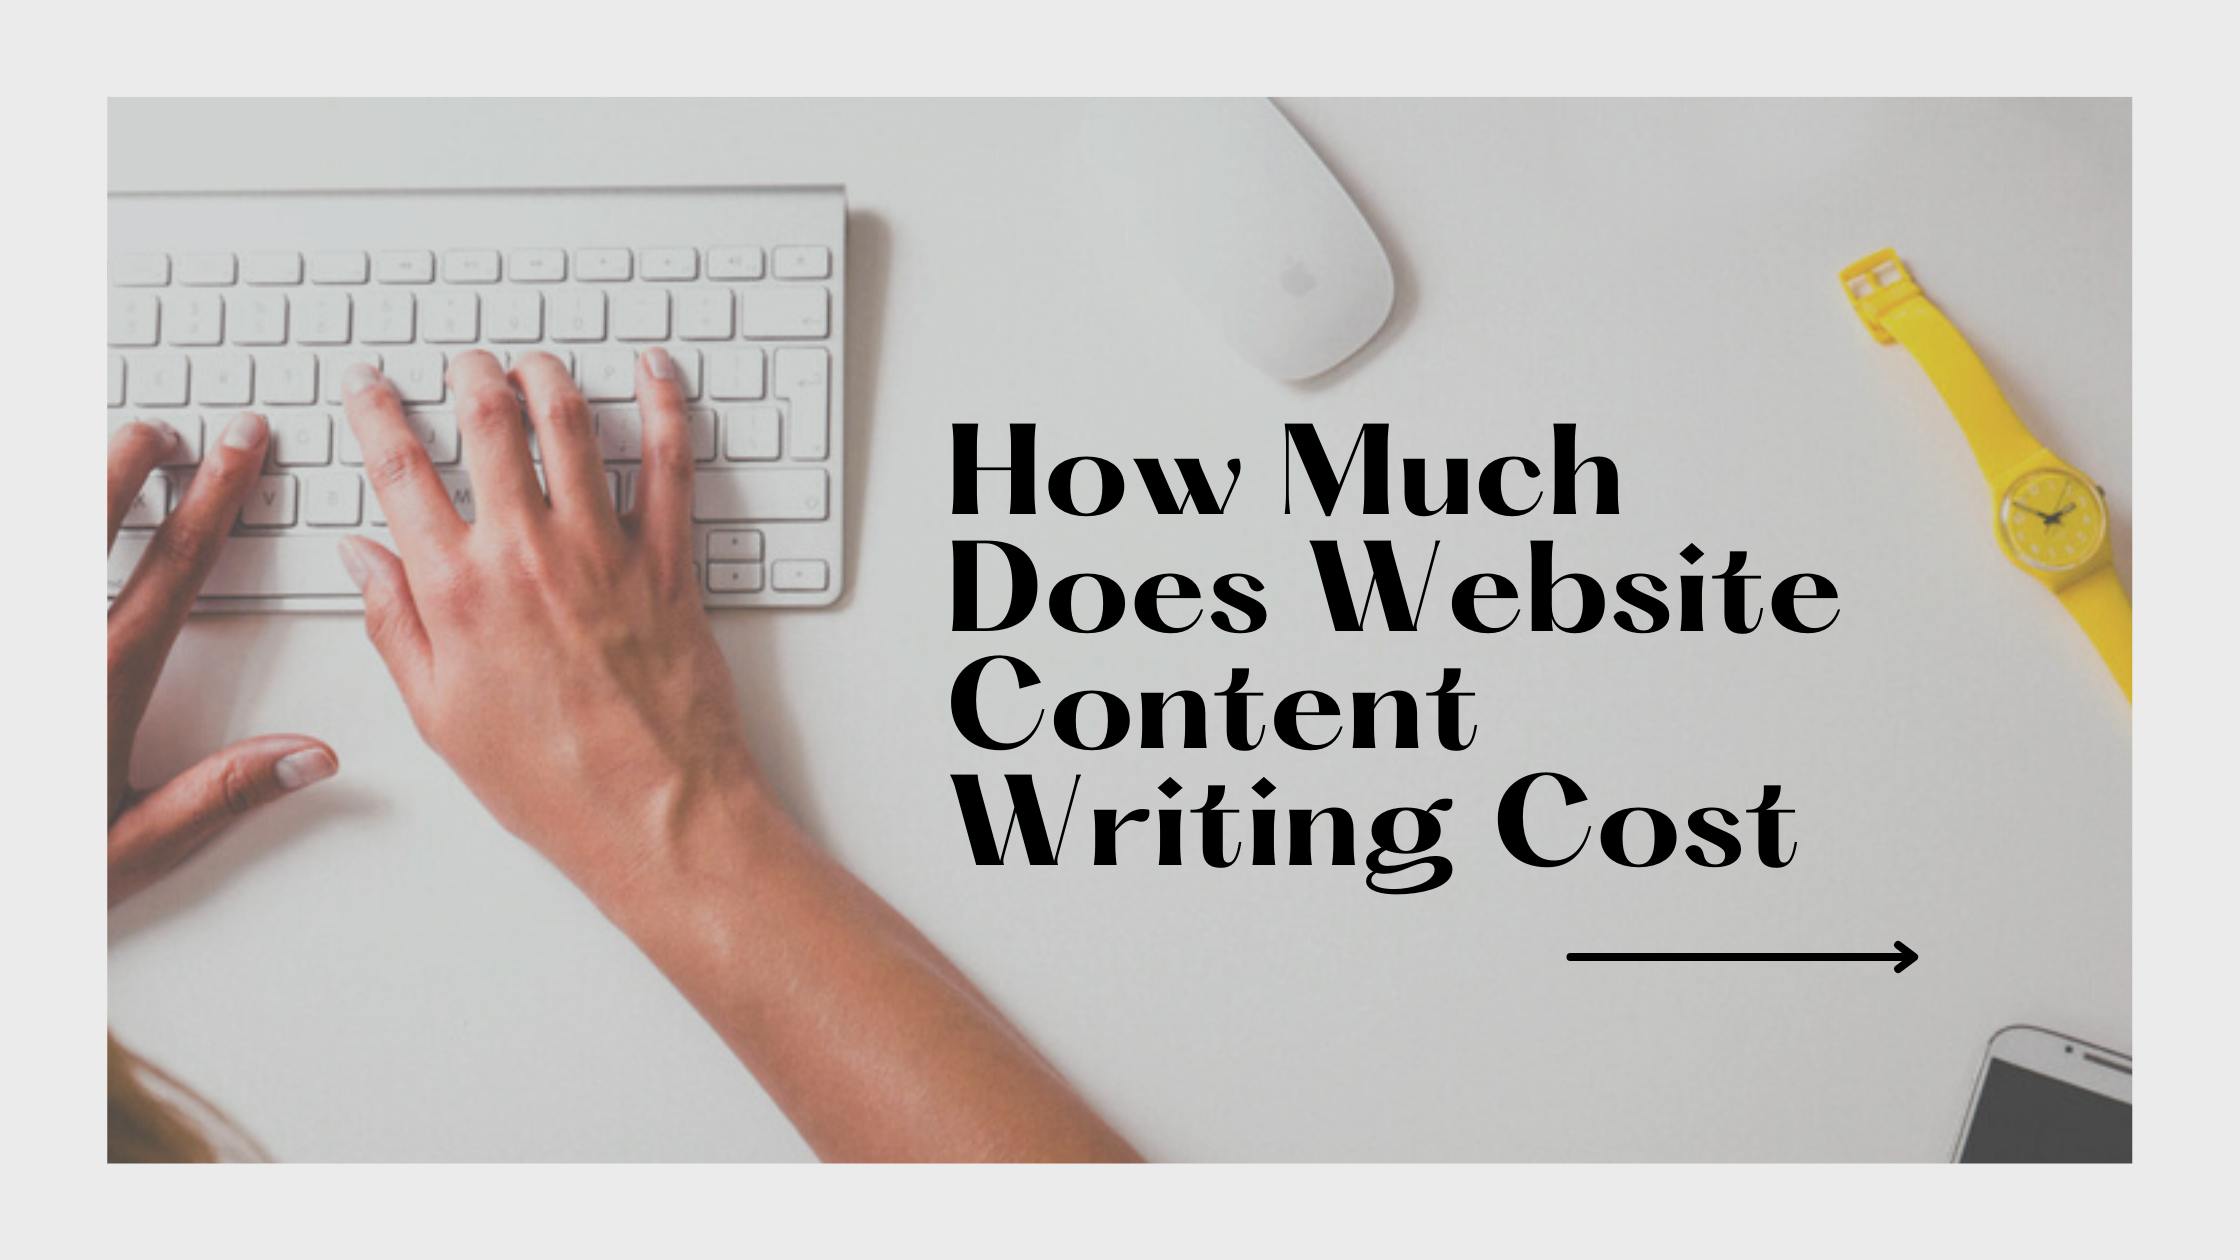 How Much Does Website Content Writing Cost